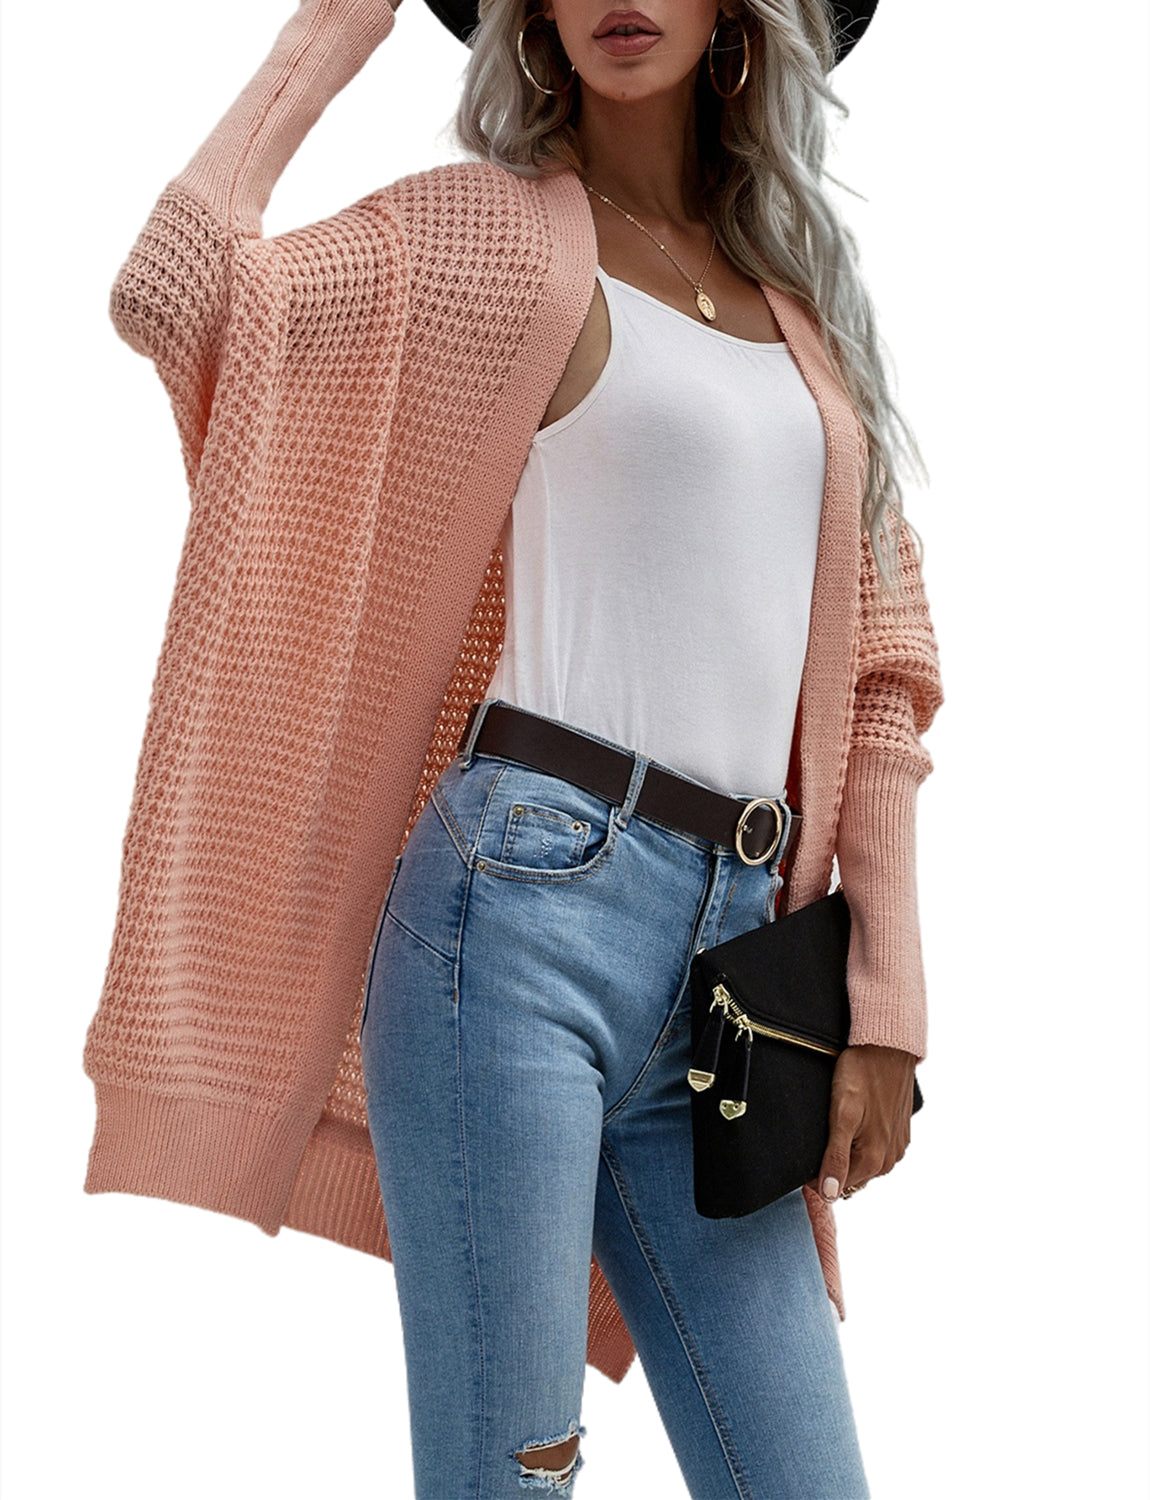 Women's Oversize Cardigan Sweater Loose Casual Batwing Sleeves Fashion Top